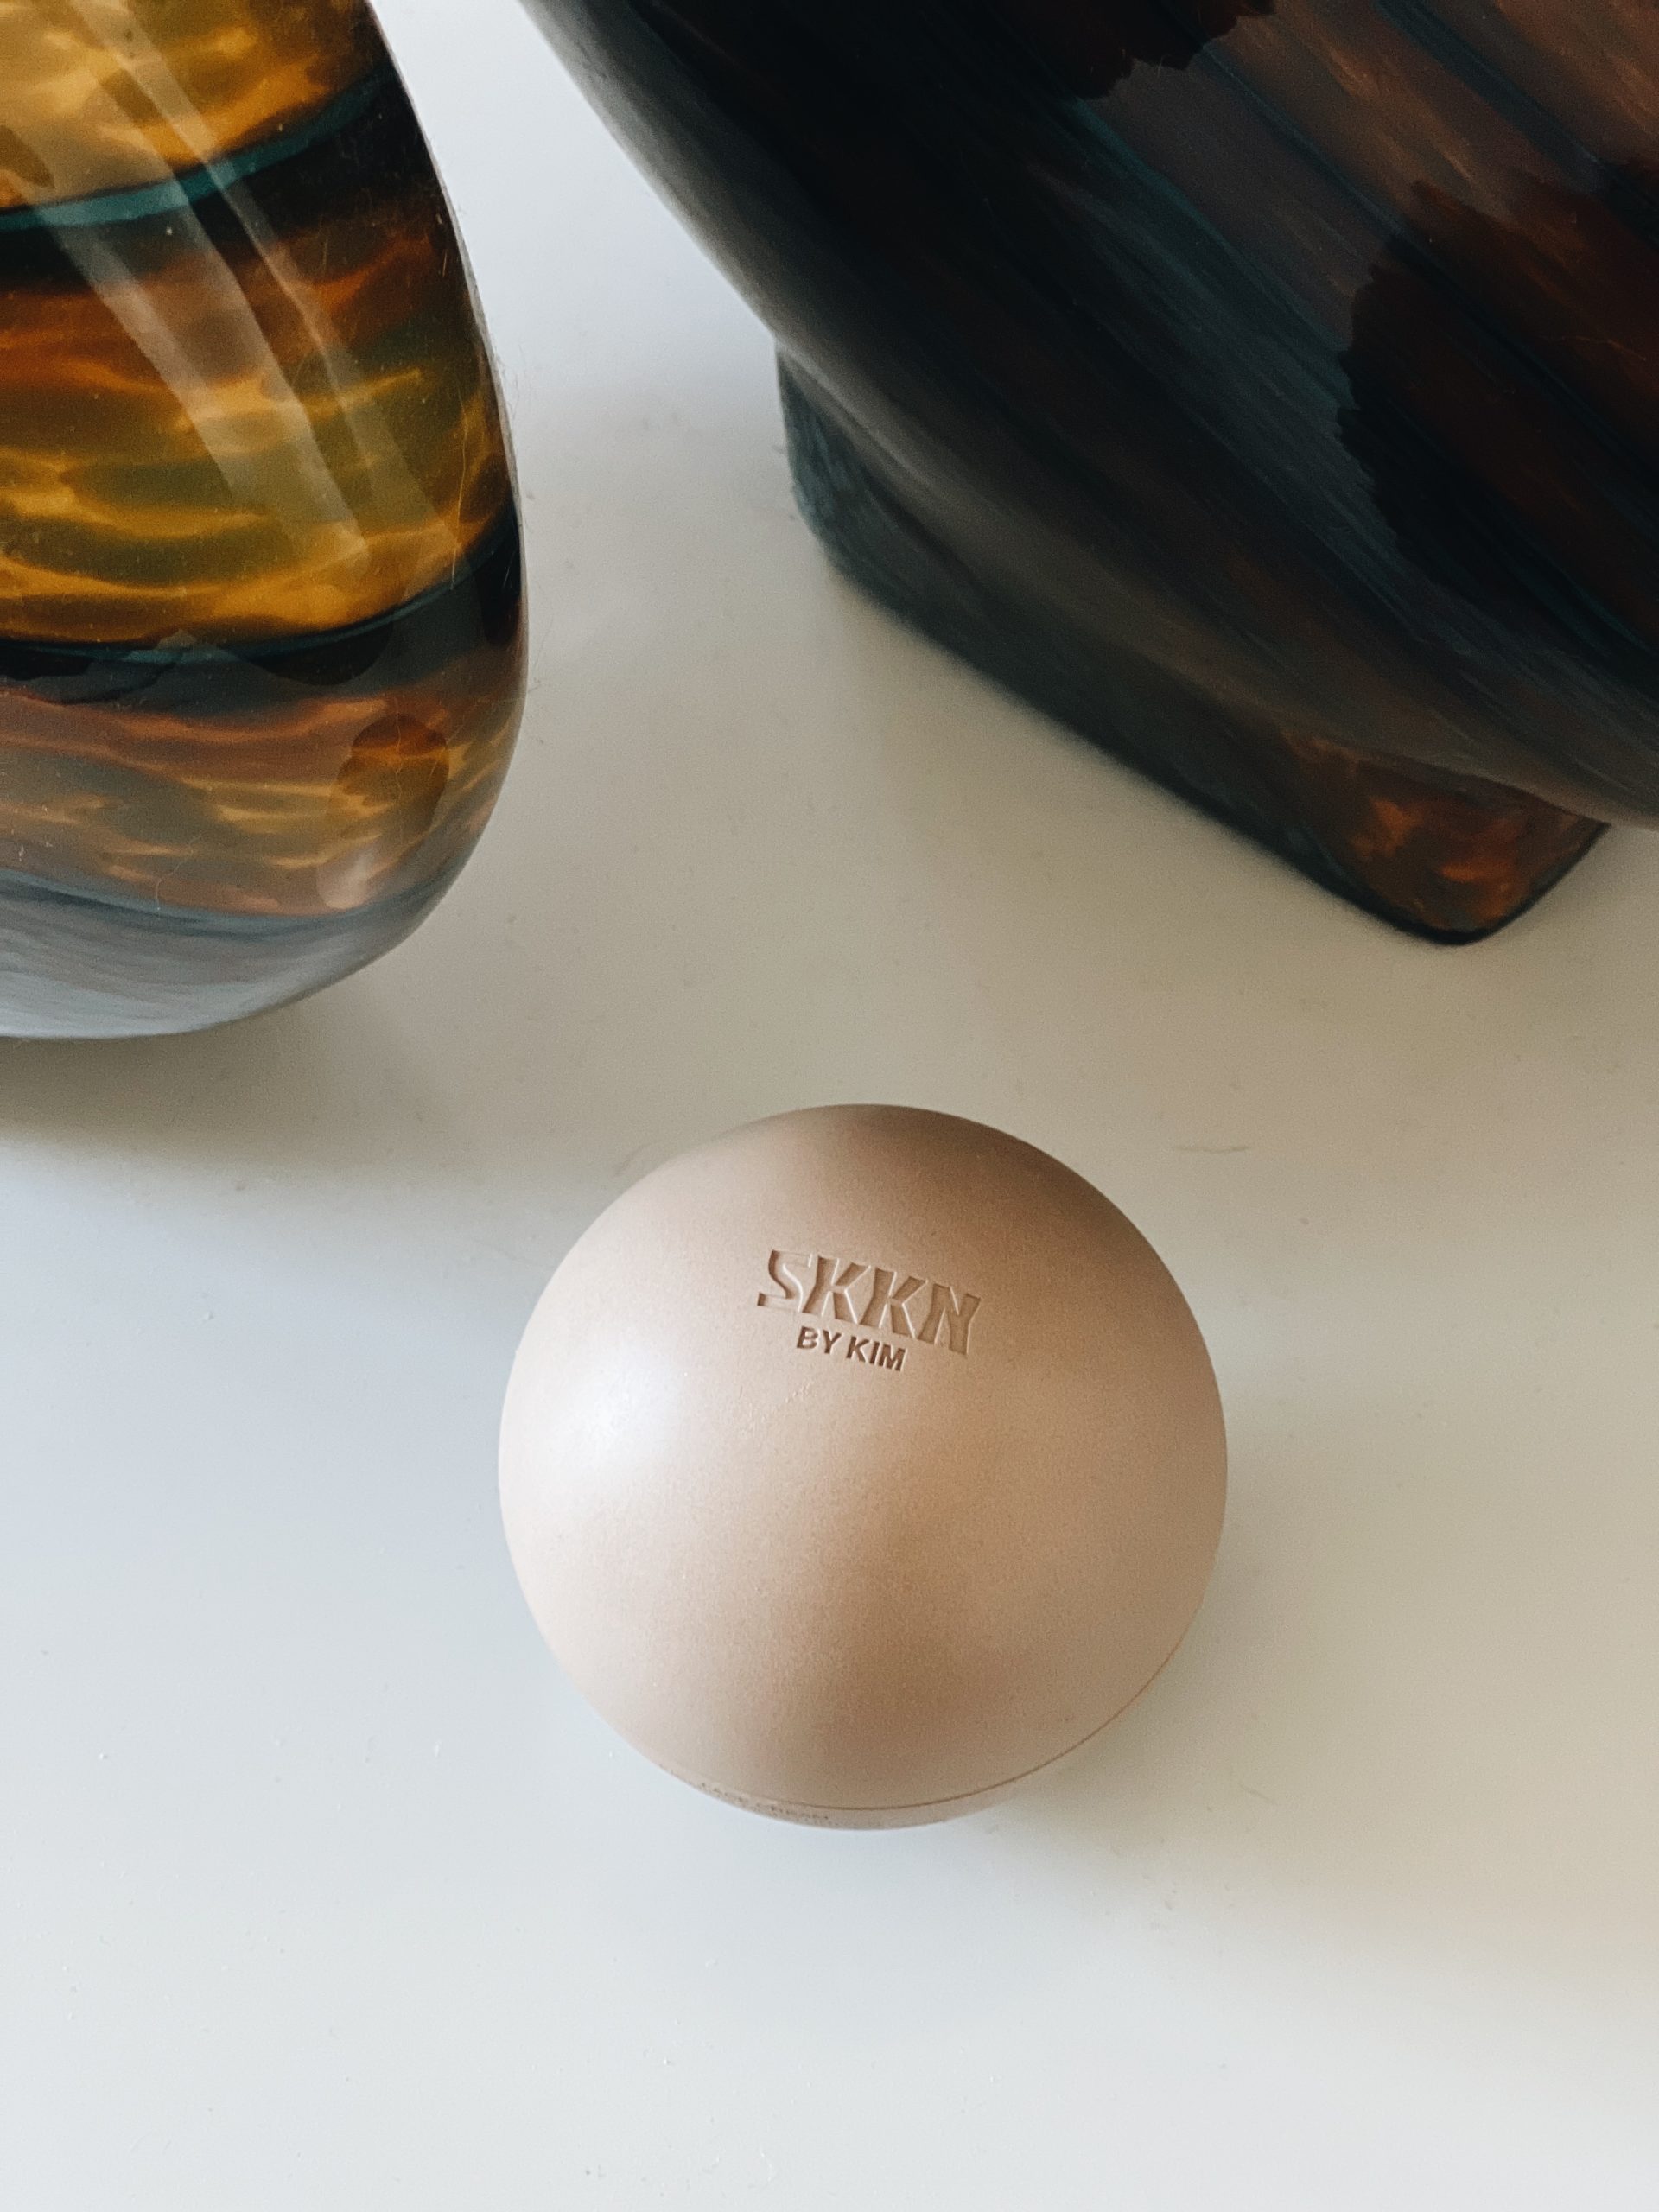 SKKN by Kim Face Cream Review – My Honest Thoughts